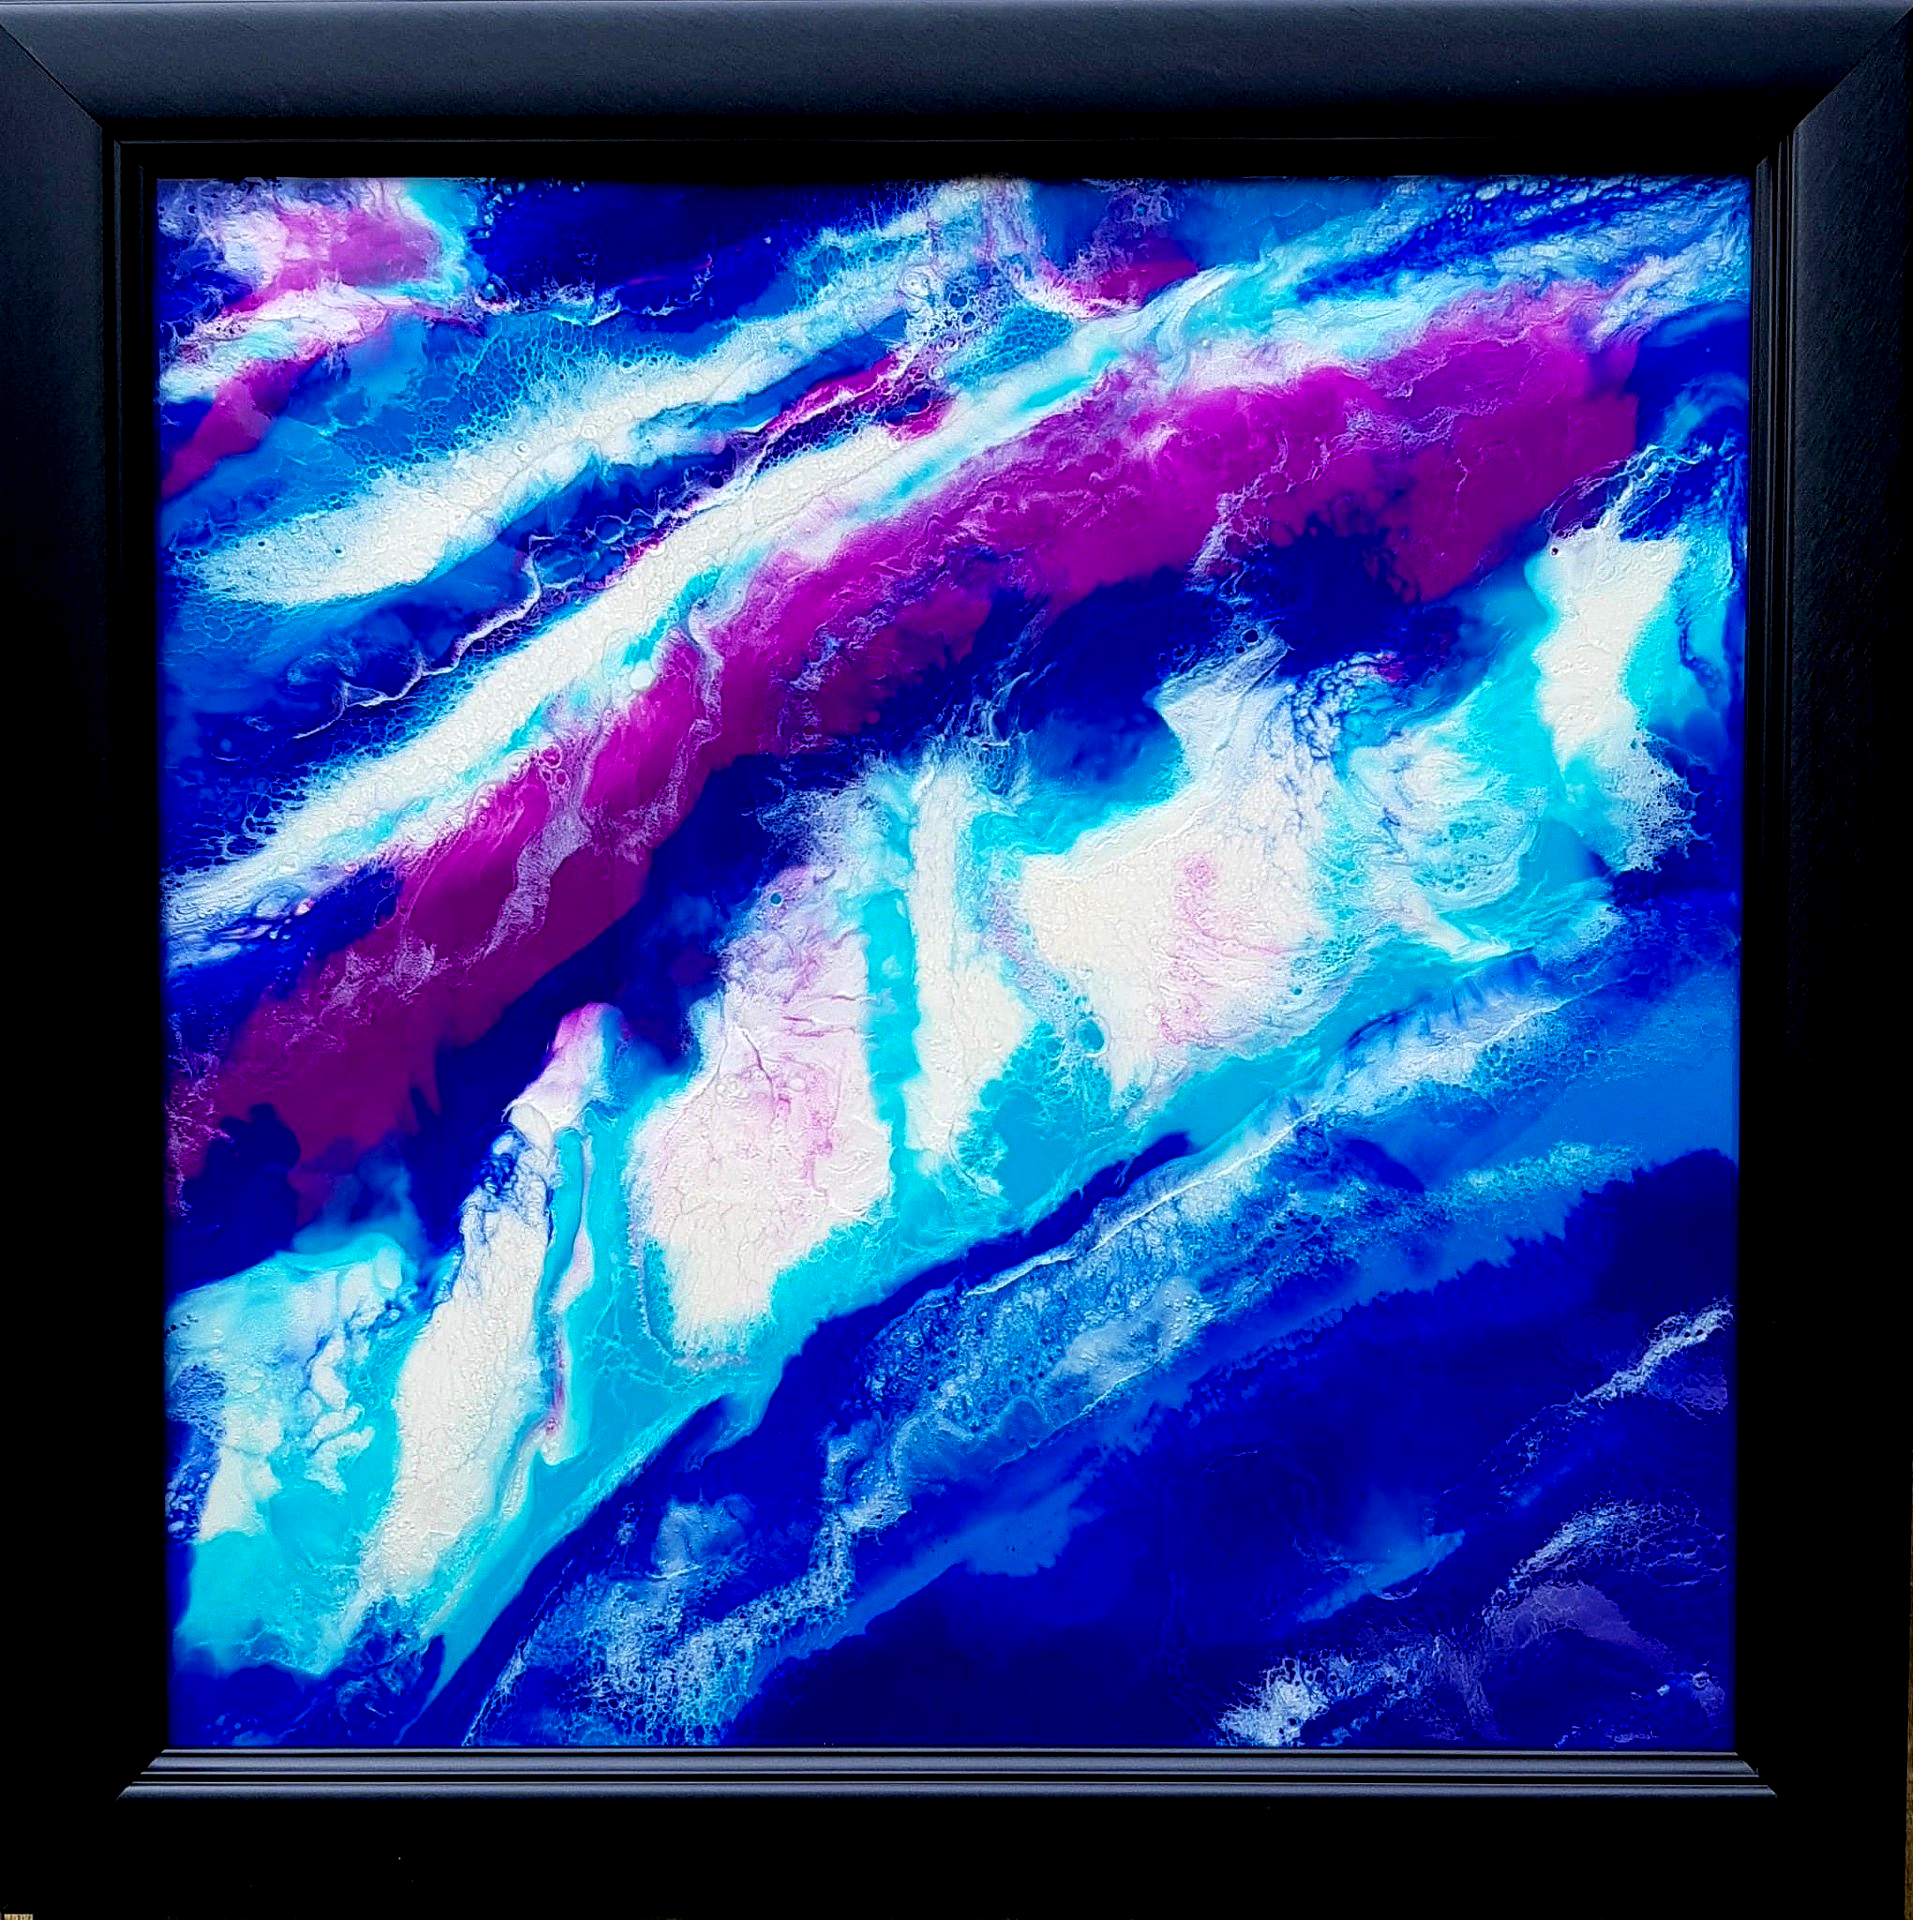 Out of the Blue, Original abstract painting with blue, purple and mother of pearl colours representing the deep blue see. Meditative piece.